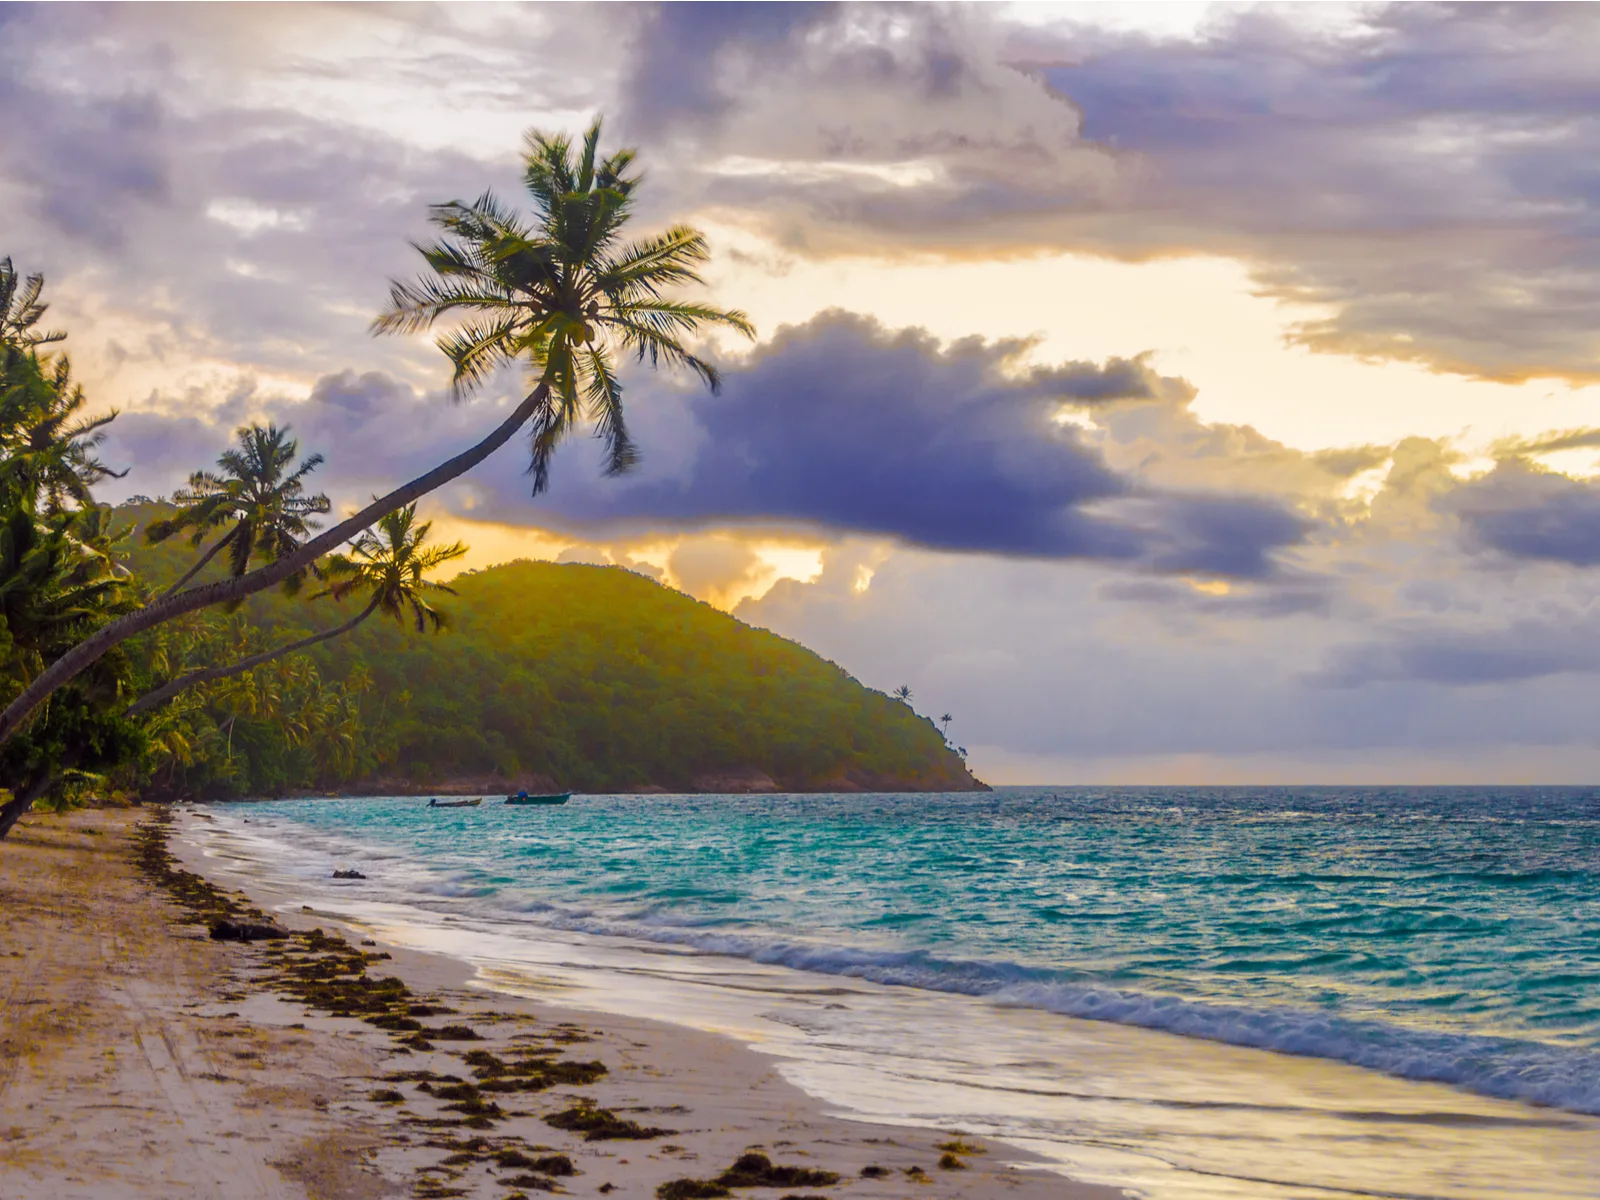 To illustrate the best time to visit Colombia, a sunset over the San Andres beach is pictured